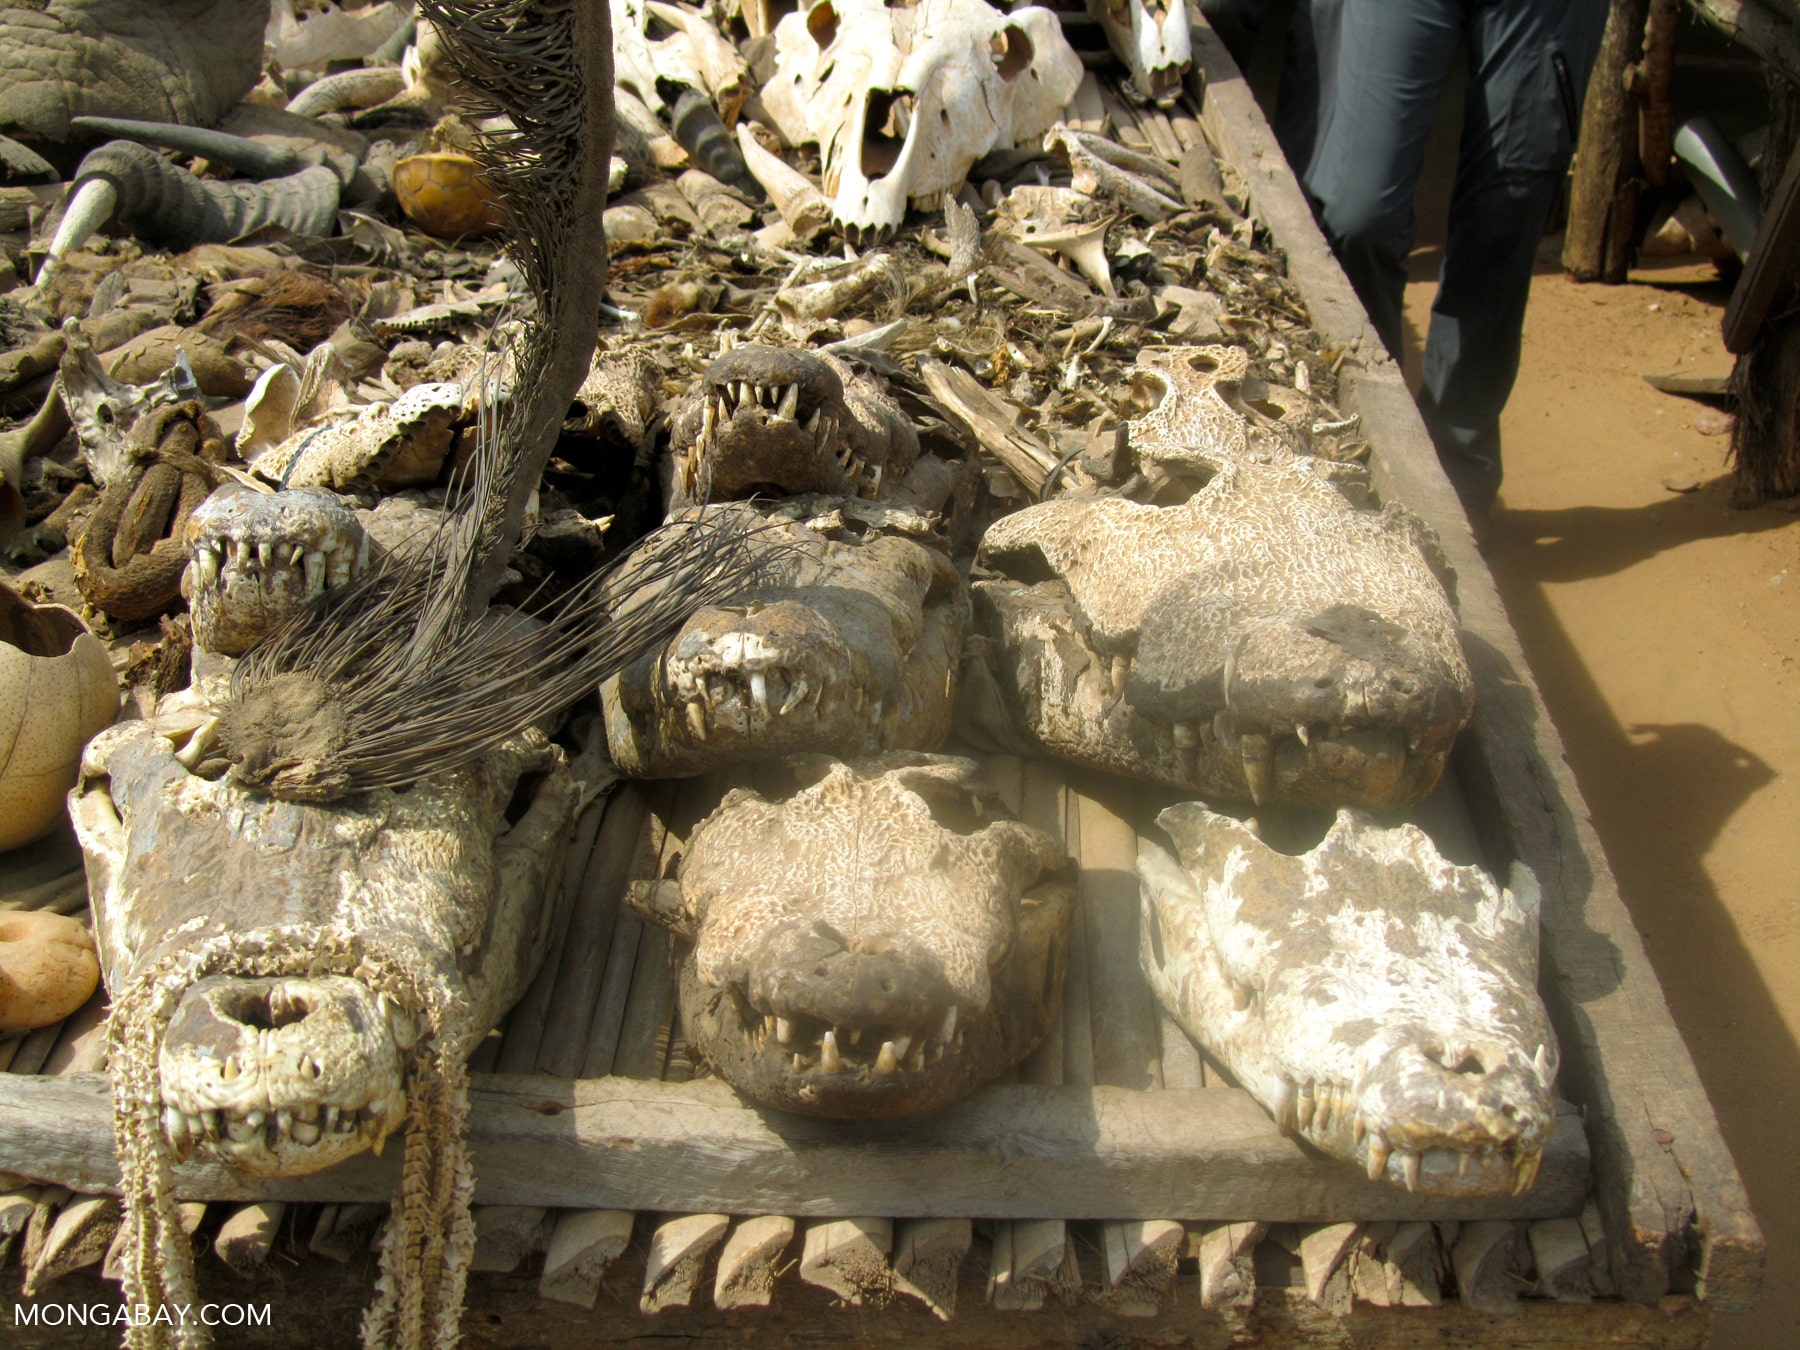 Crocodile snouts at a wildlife products market in Togo